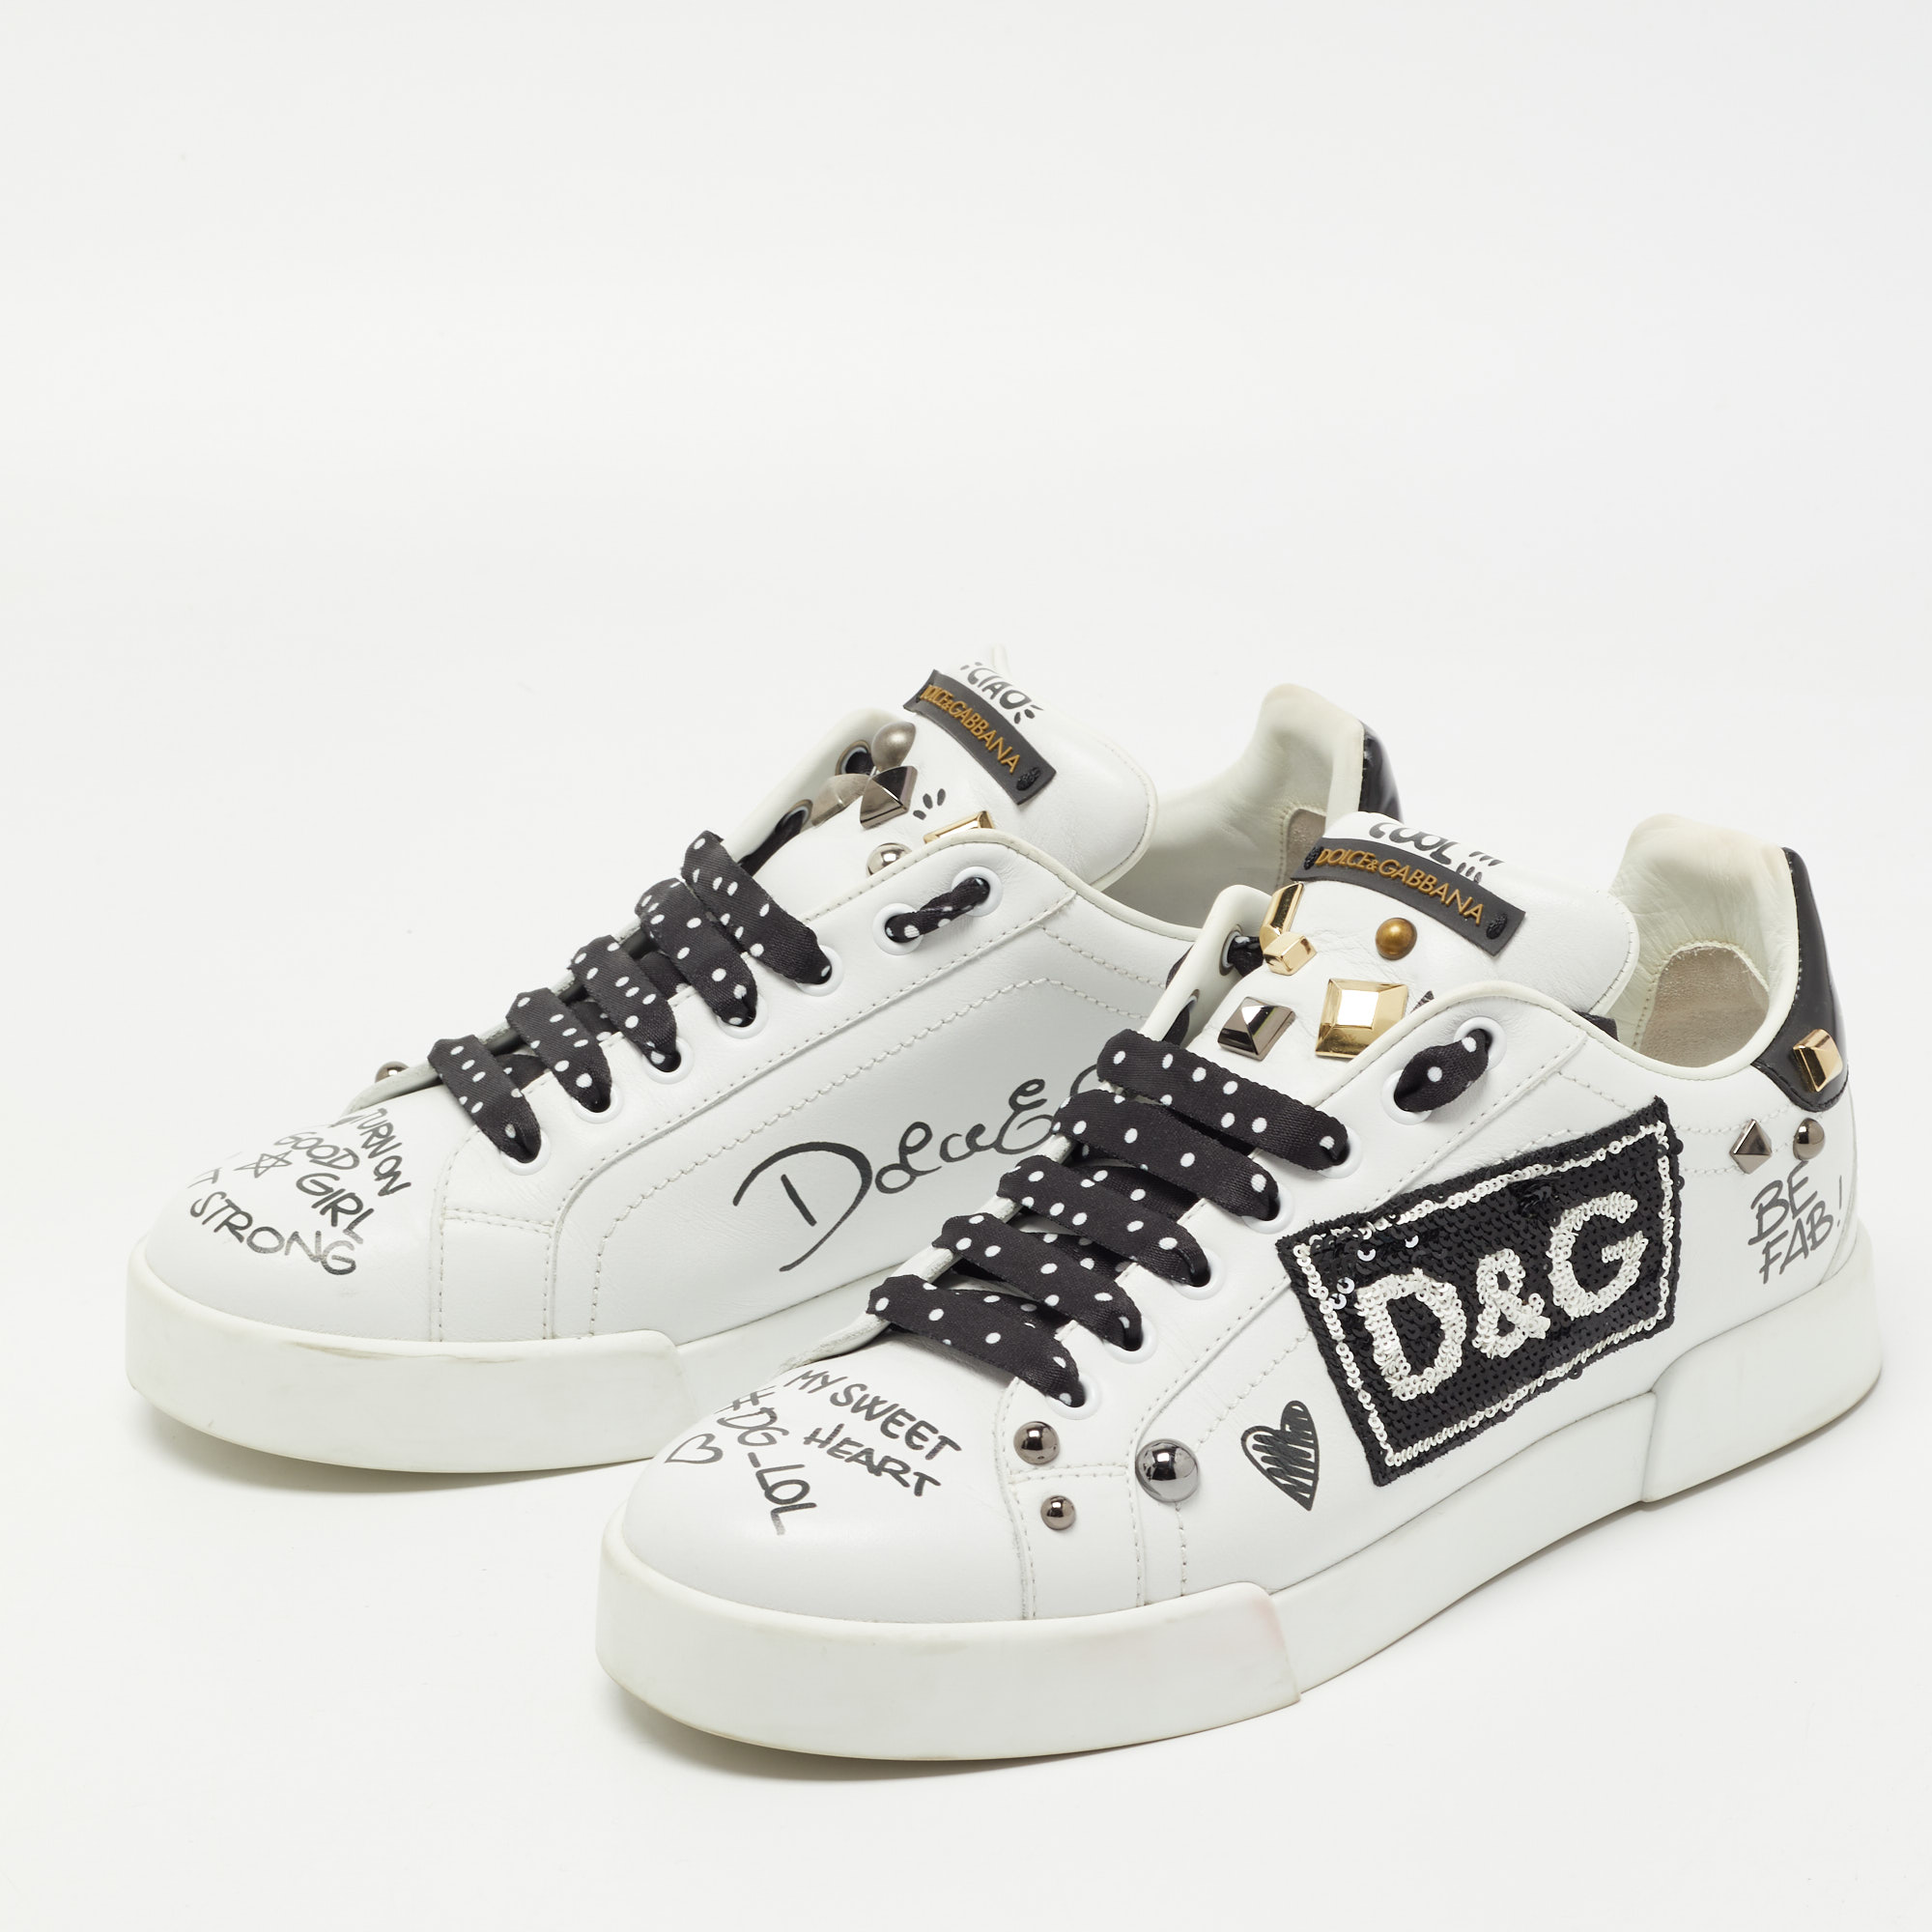 

Dolce & Gabbana White/Black Leather Studded and Applique Portofino Low Top Sneakers Size